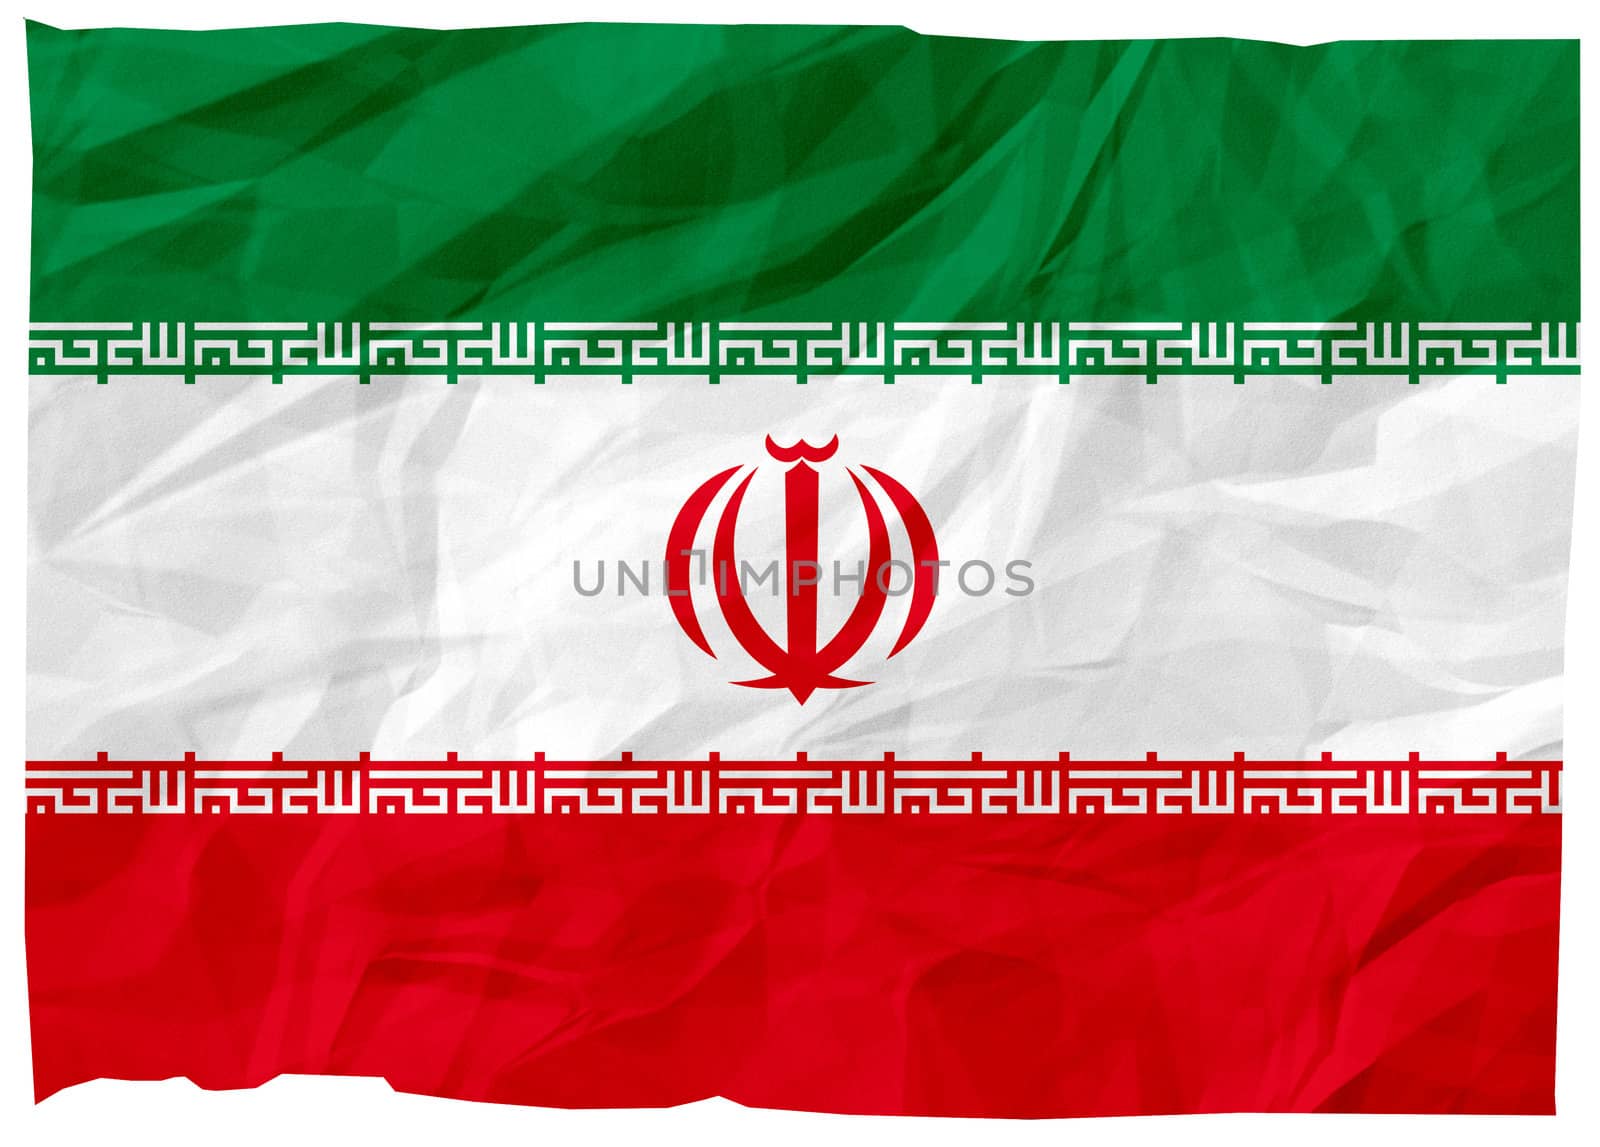 The national flag of Iran (Asia).